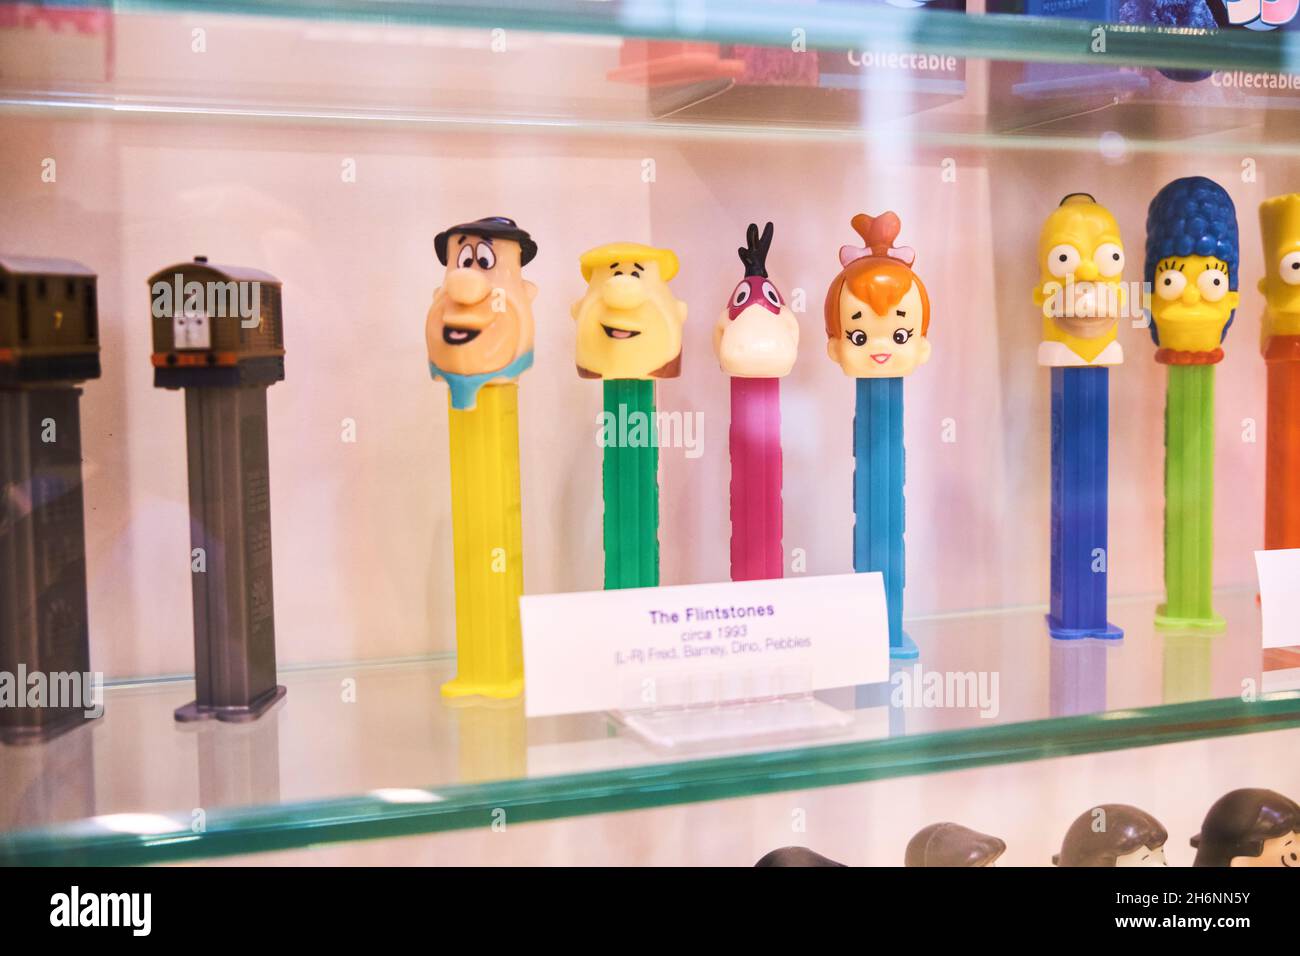 Flintstones Fred, Barney, Dino, Pebbles dispensers. At the Pez factory, museum, visitor center in Orange, Connecticut. Stock Photo